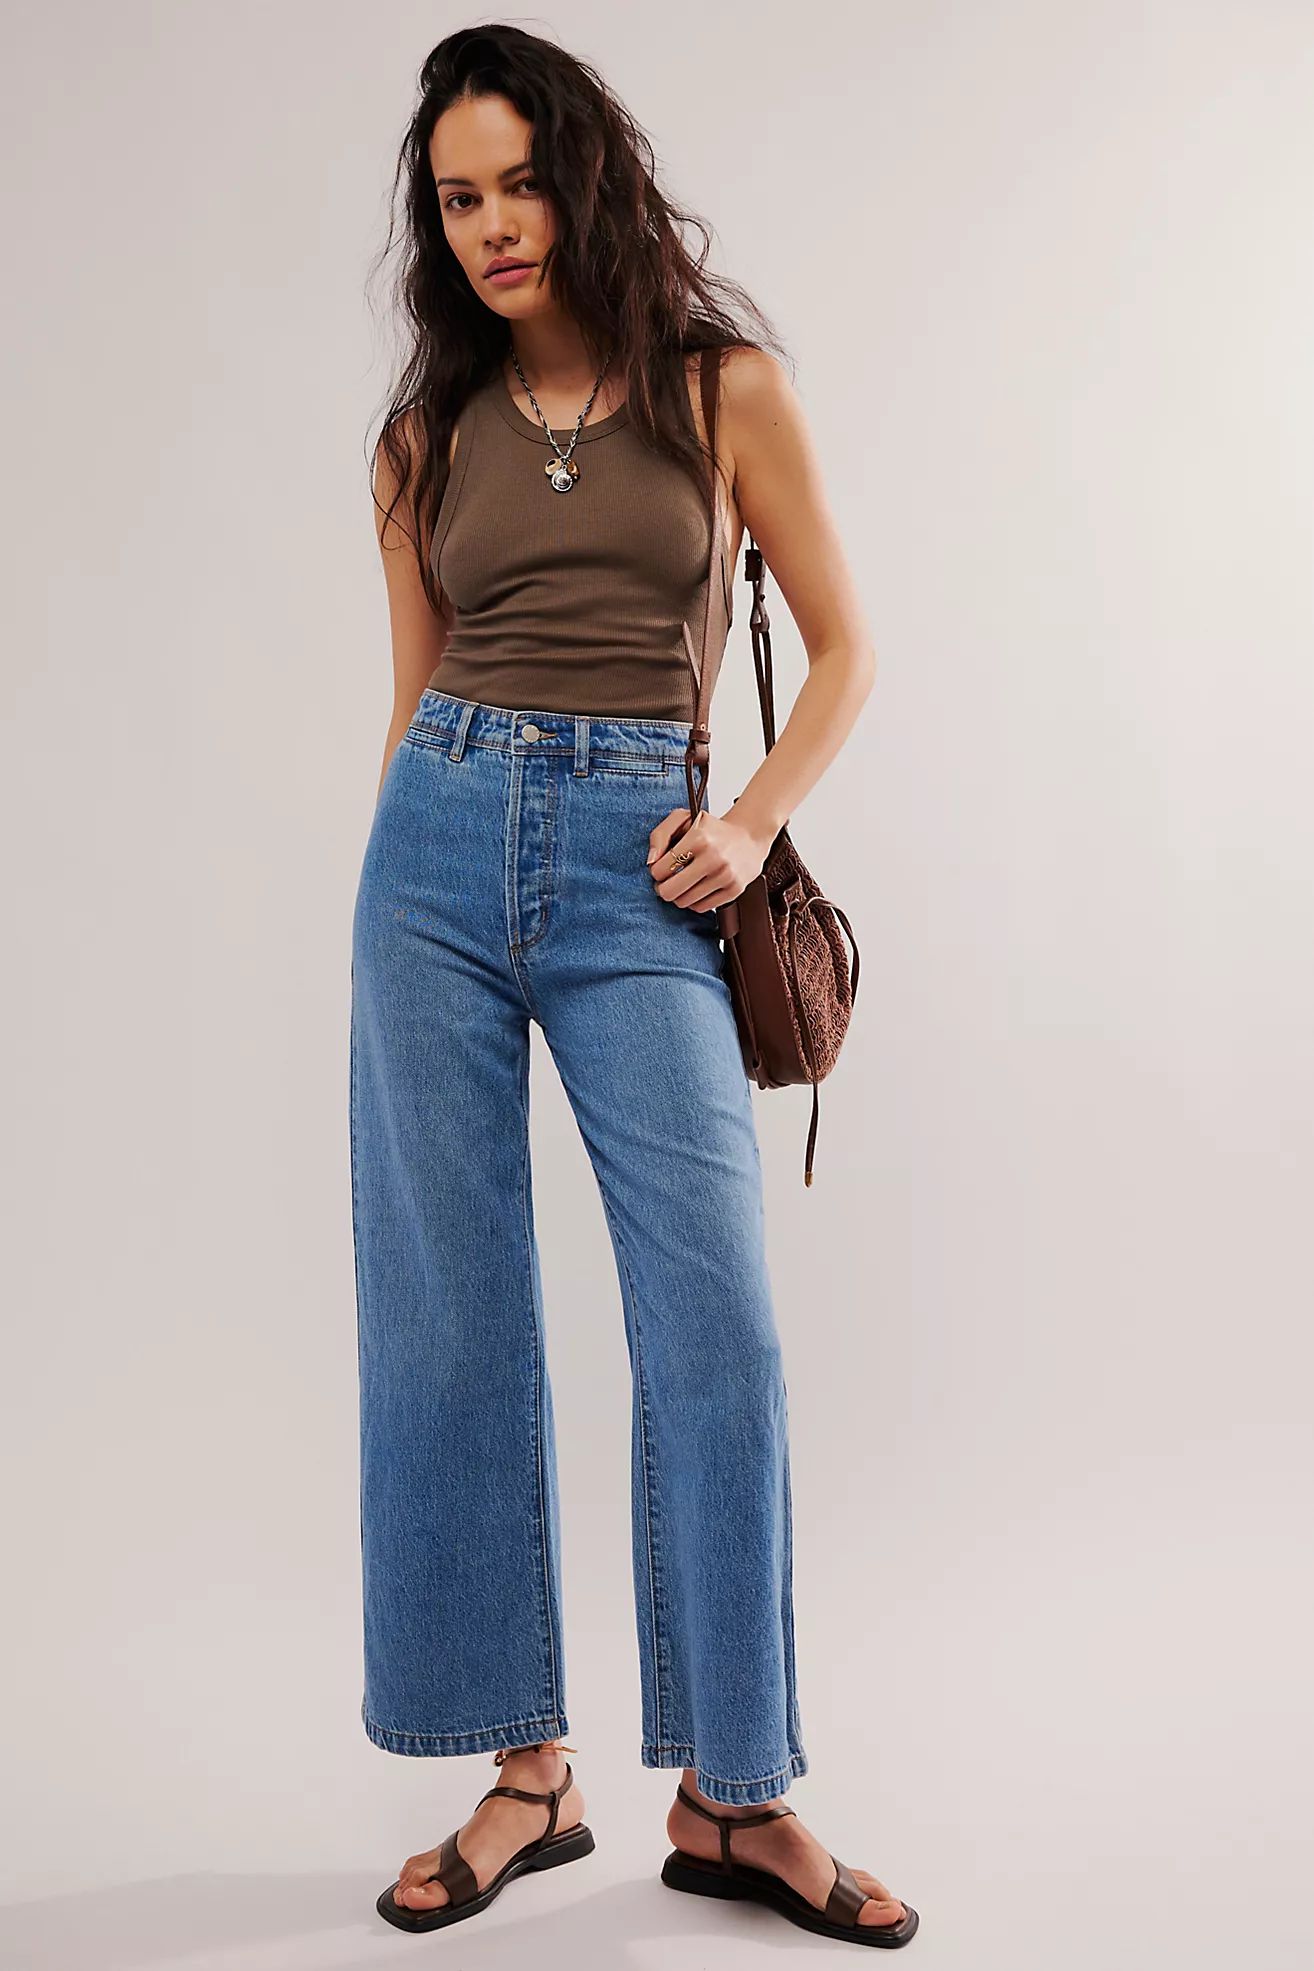 Rolla’s Sailor Jeans | Free People (Global - UK&FR Excluded)